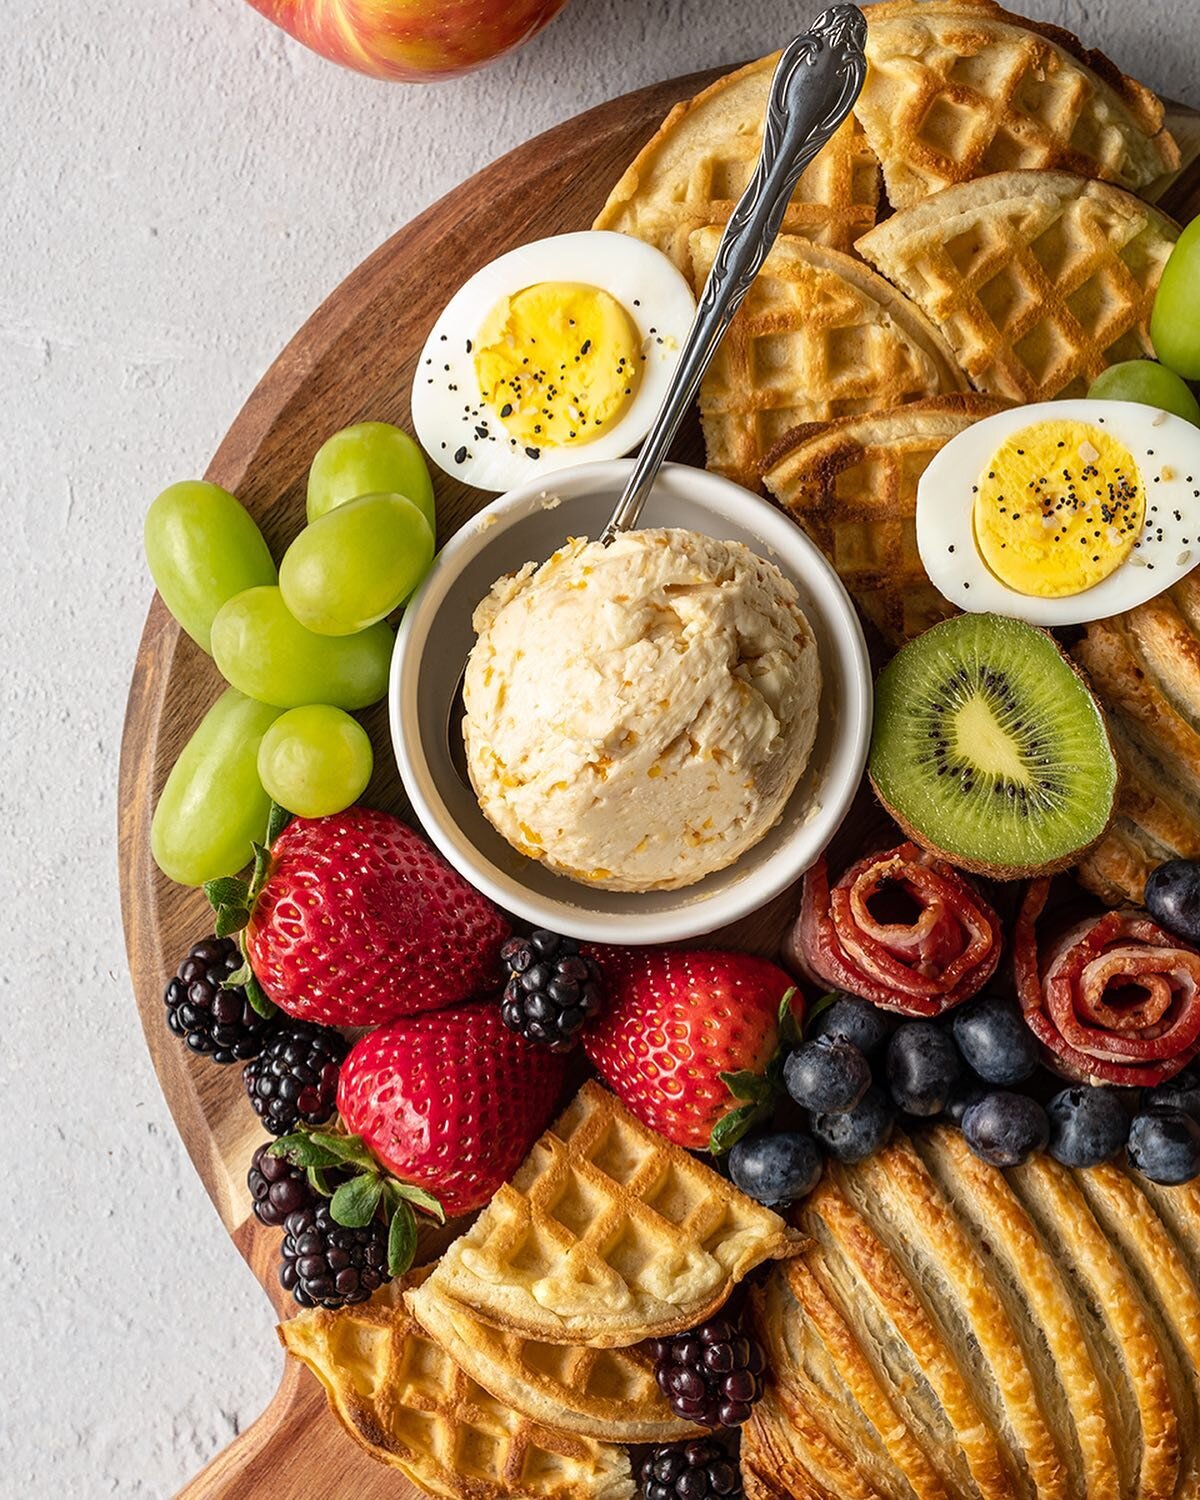 Build a breakfast board with one of our 10 flavors of butter! 

Here&rsquo;s where to find us:
-I&rsquo;ll be at @ingoodcompanynash with 2 butter boards for sampling from 12-2pm TODAY! 🎃

These stores have been restocked as of today:
- @greendoorgou